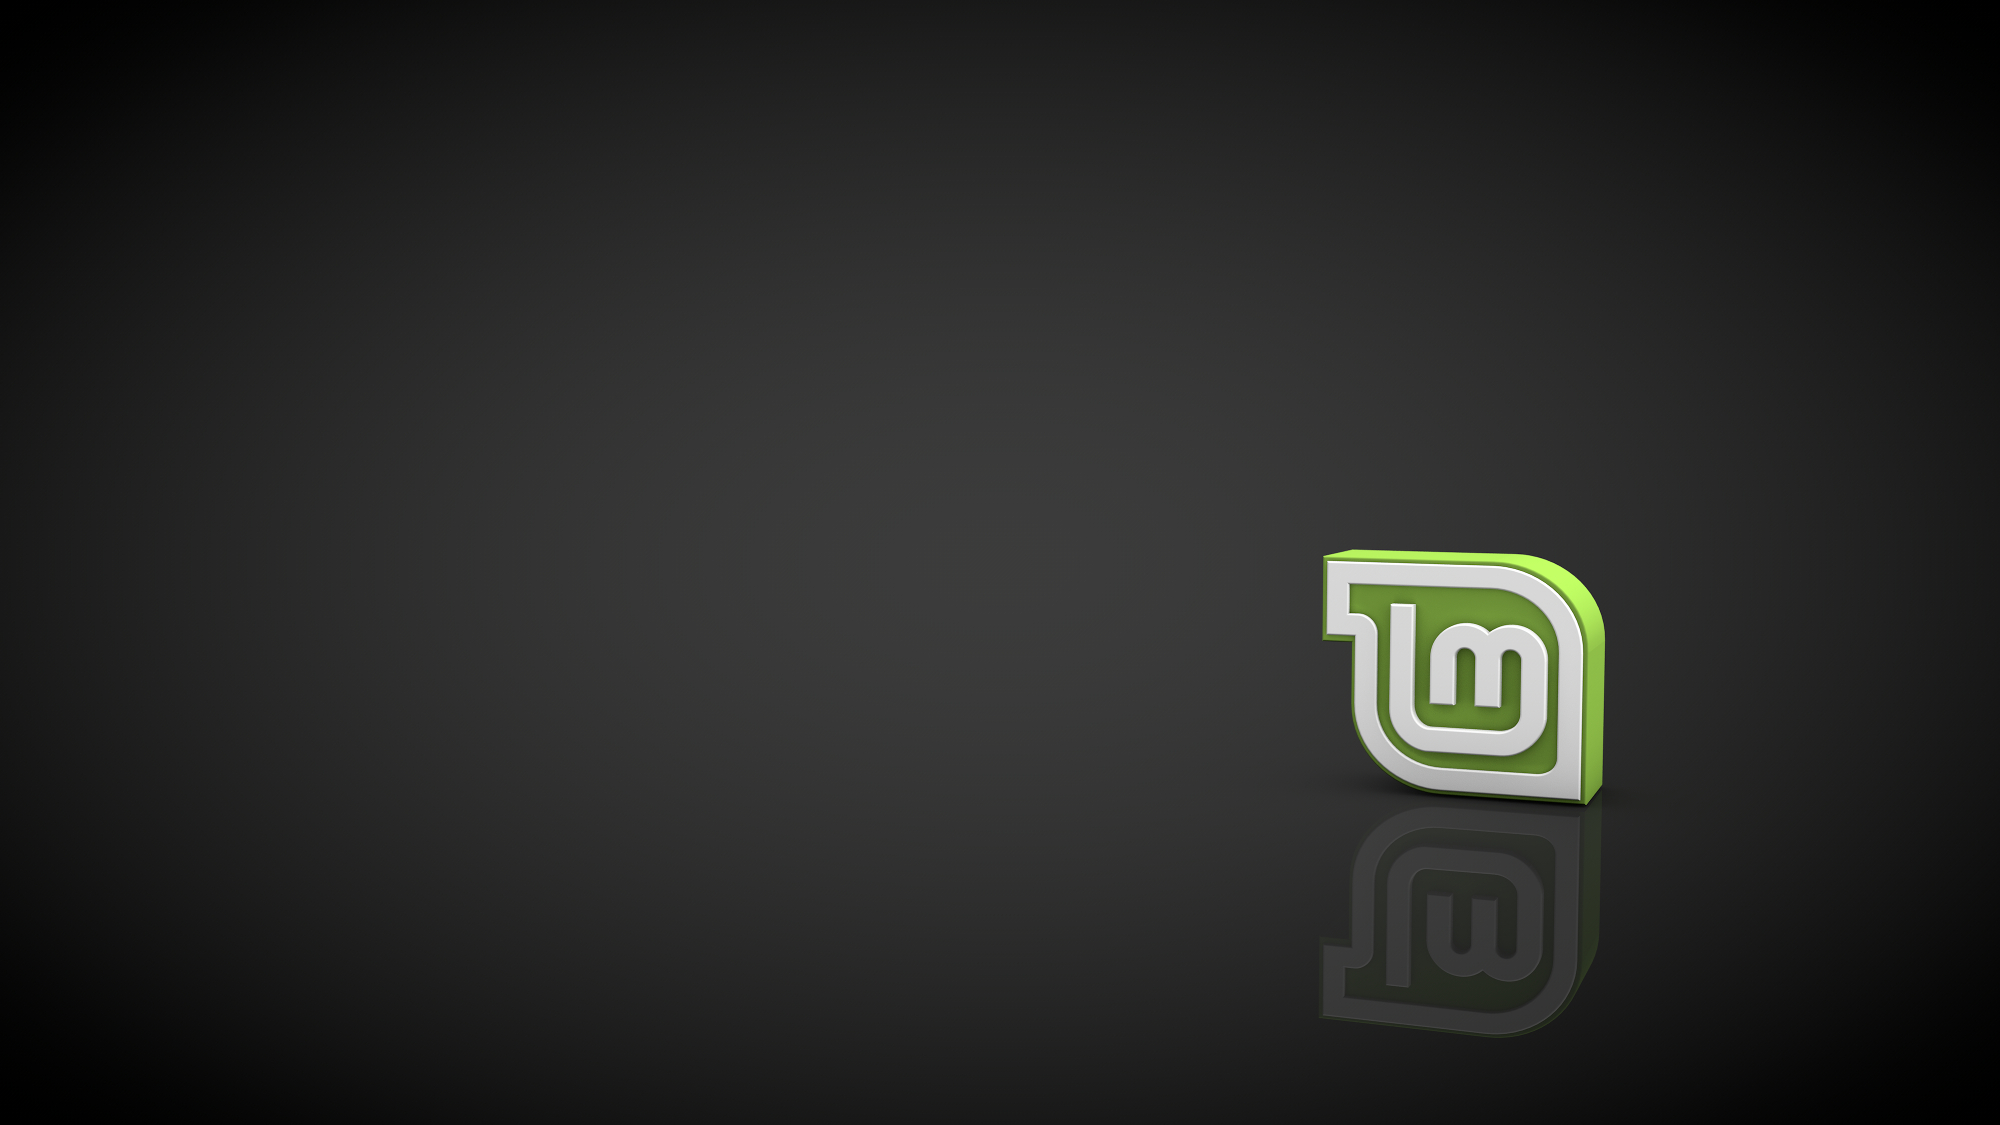 Linux Mint Wallpapers